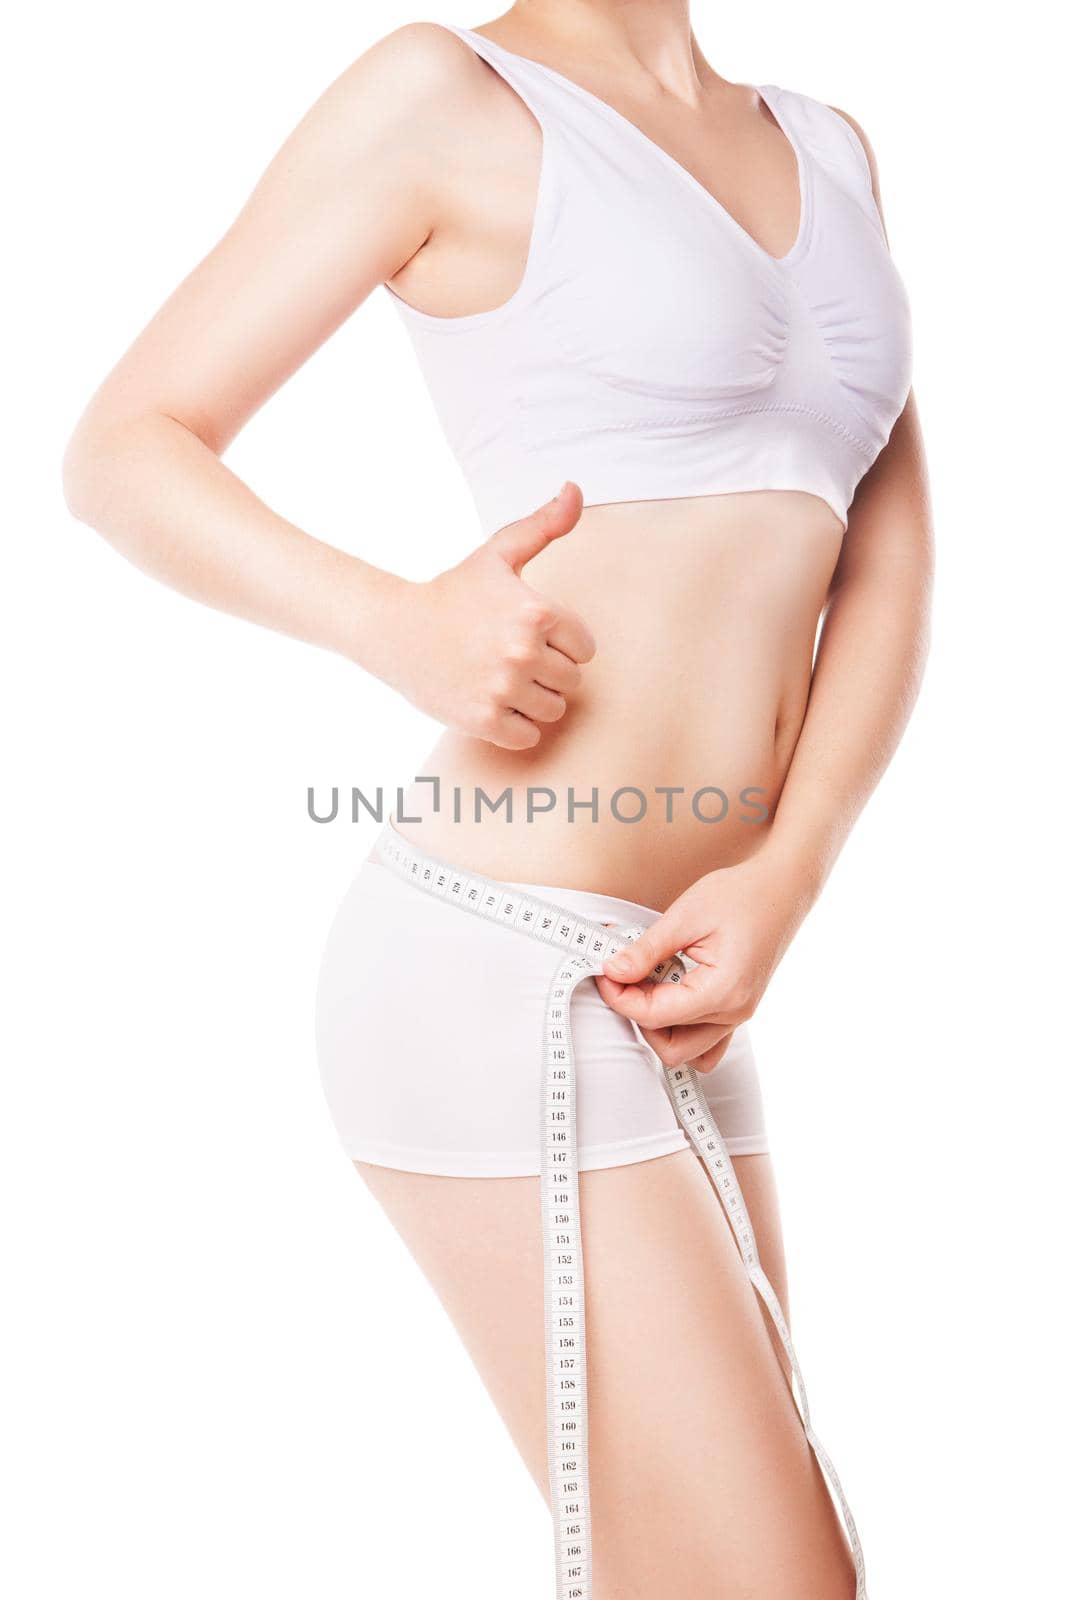 Athletic slim woman measuring her waist by measure tape after a diet and showing thumb up isolated over white background